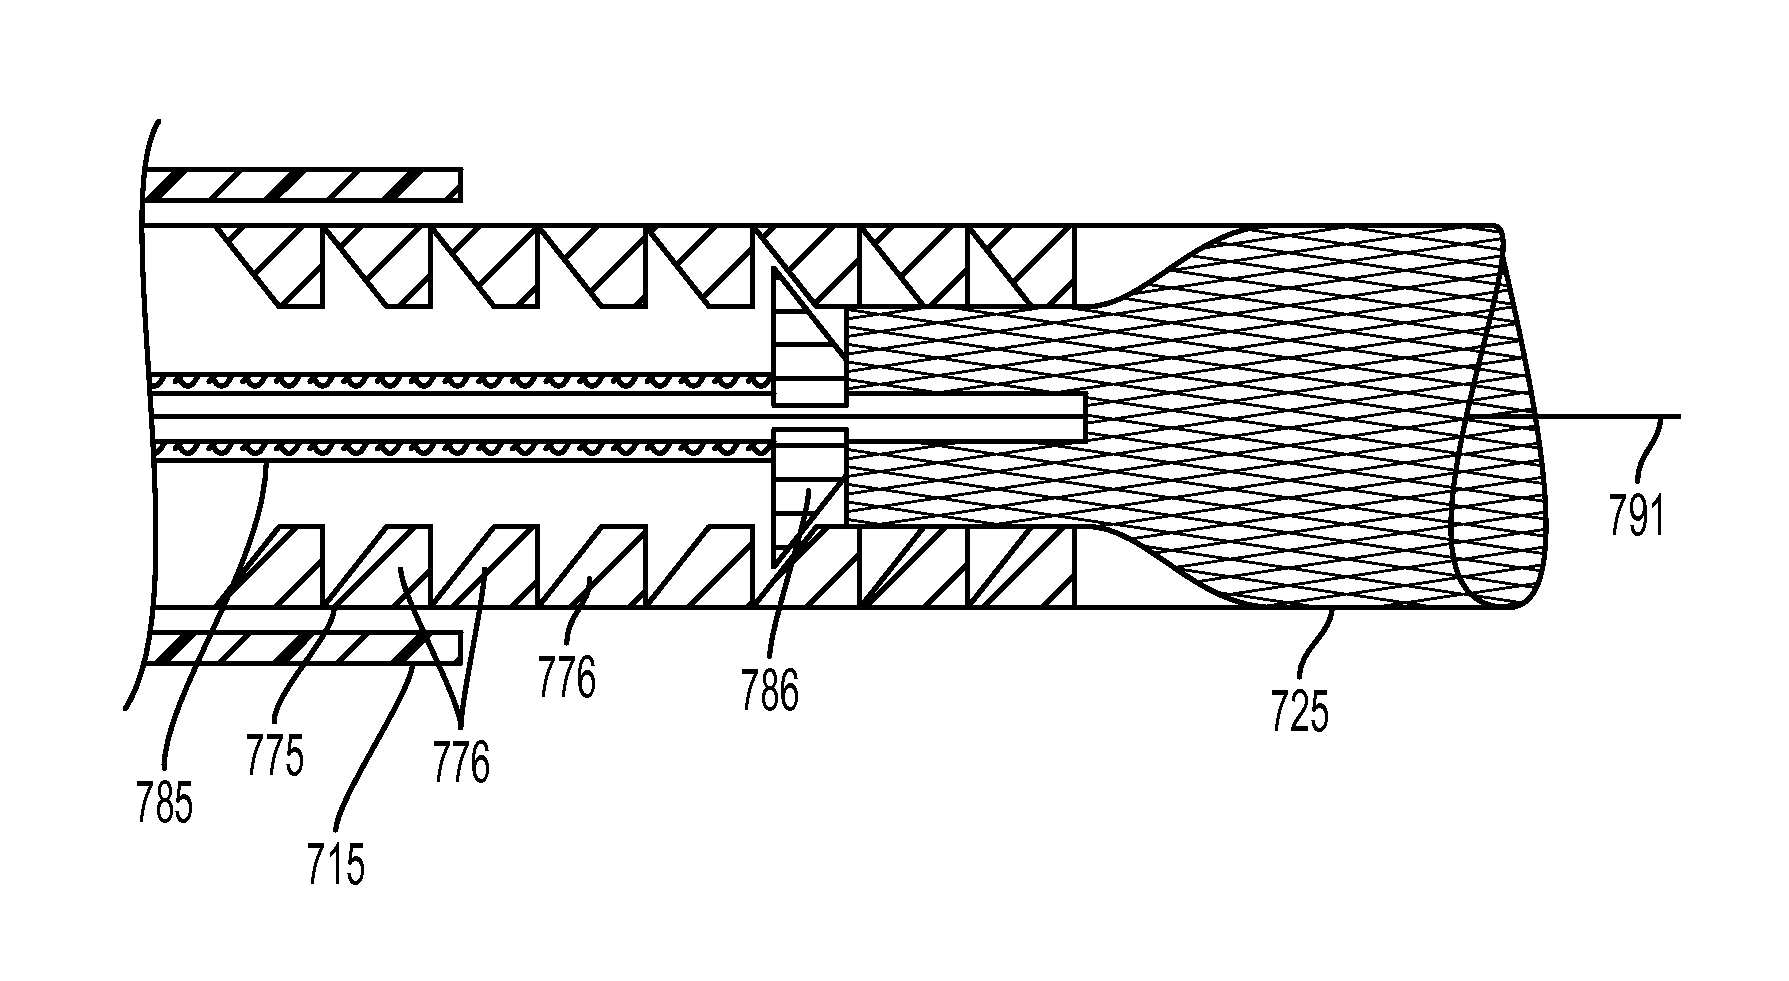 Stent Deployment Device and Methods for Use